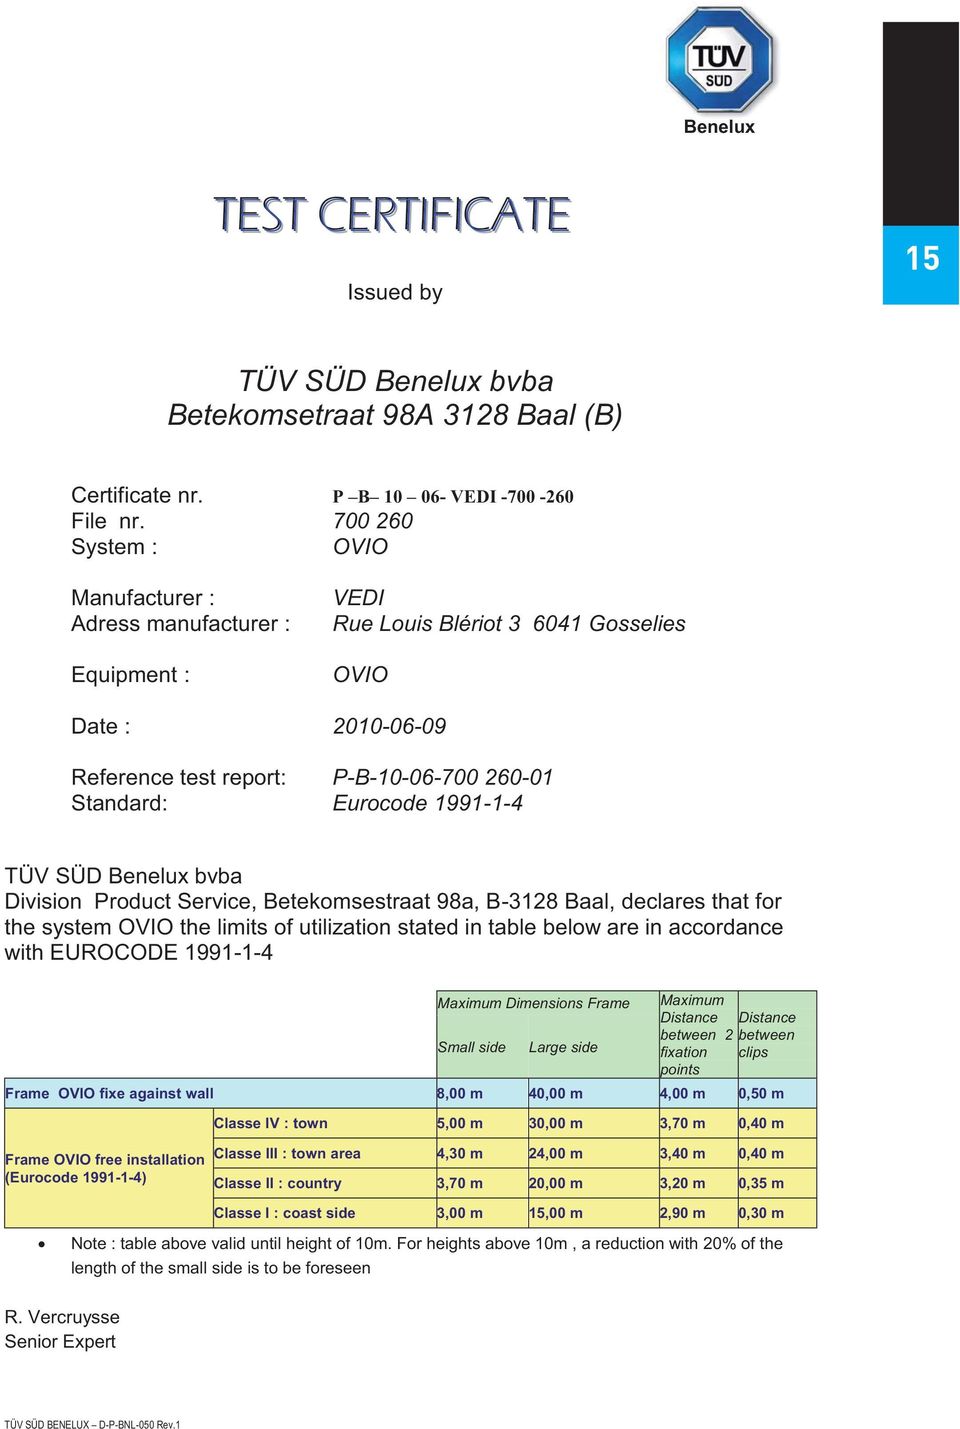 1991-1-4 TÜV SÜD Benelux bvba Division Product Service, Betekomsestraat 98a, B-3128 Baal, declares that for the system OVIO the limits of utilization stated in table below are in accordance with